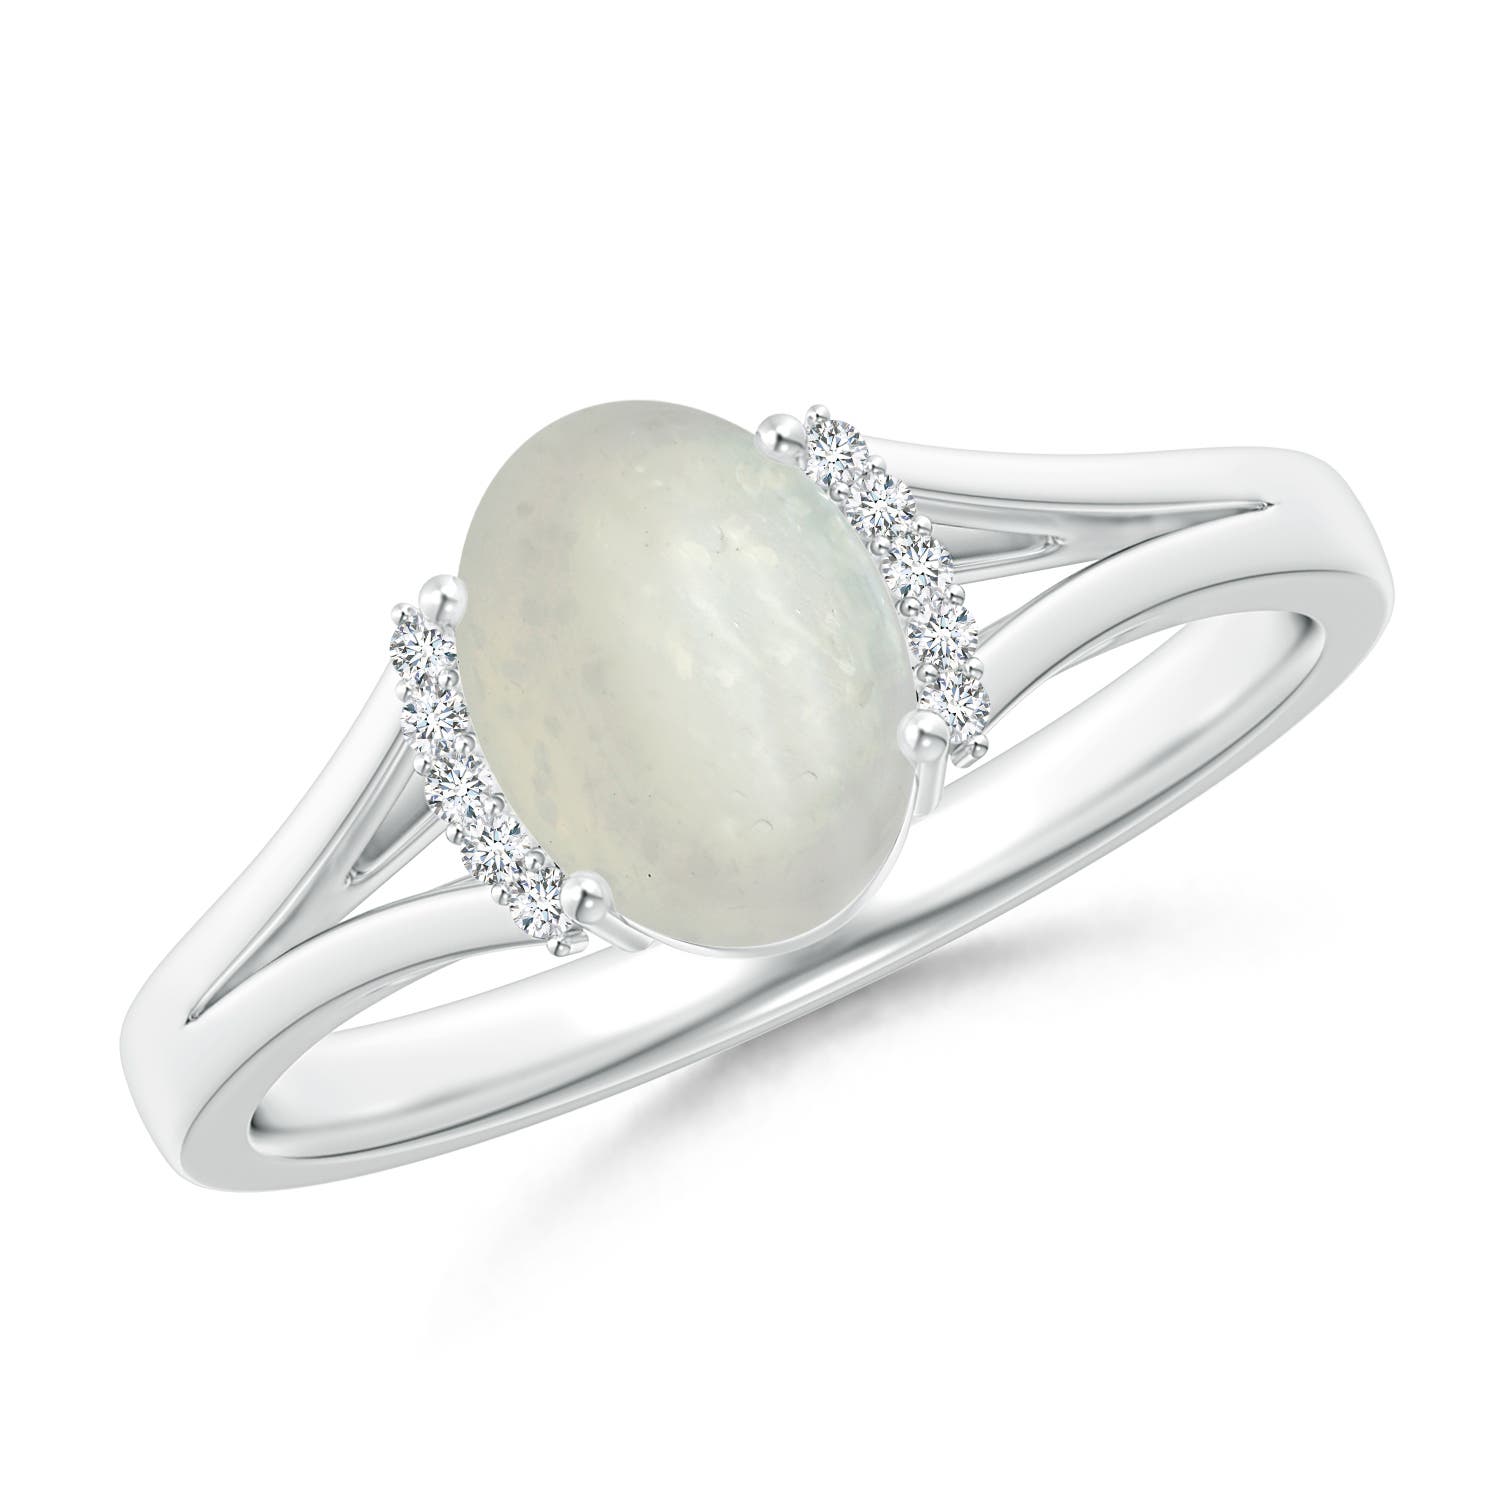 A - Moonstone / 1.15 CT / 14 KT White Gold